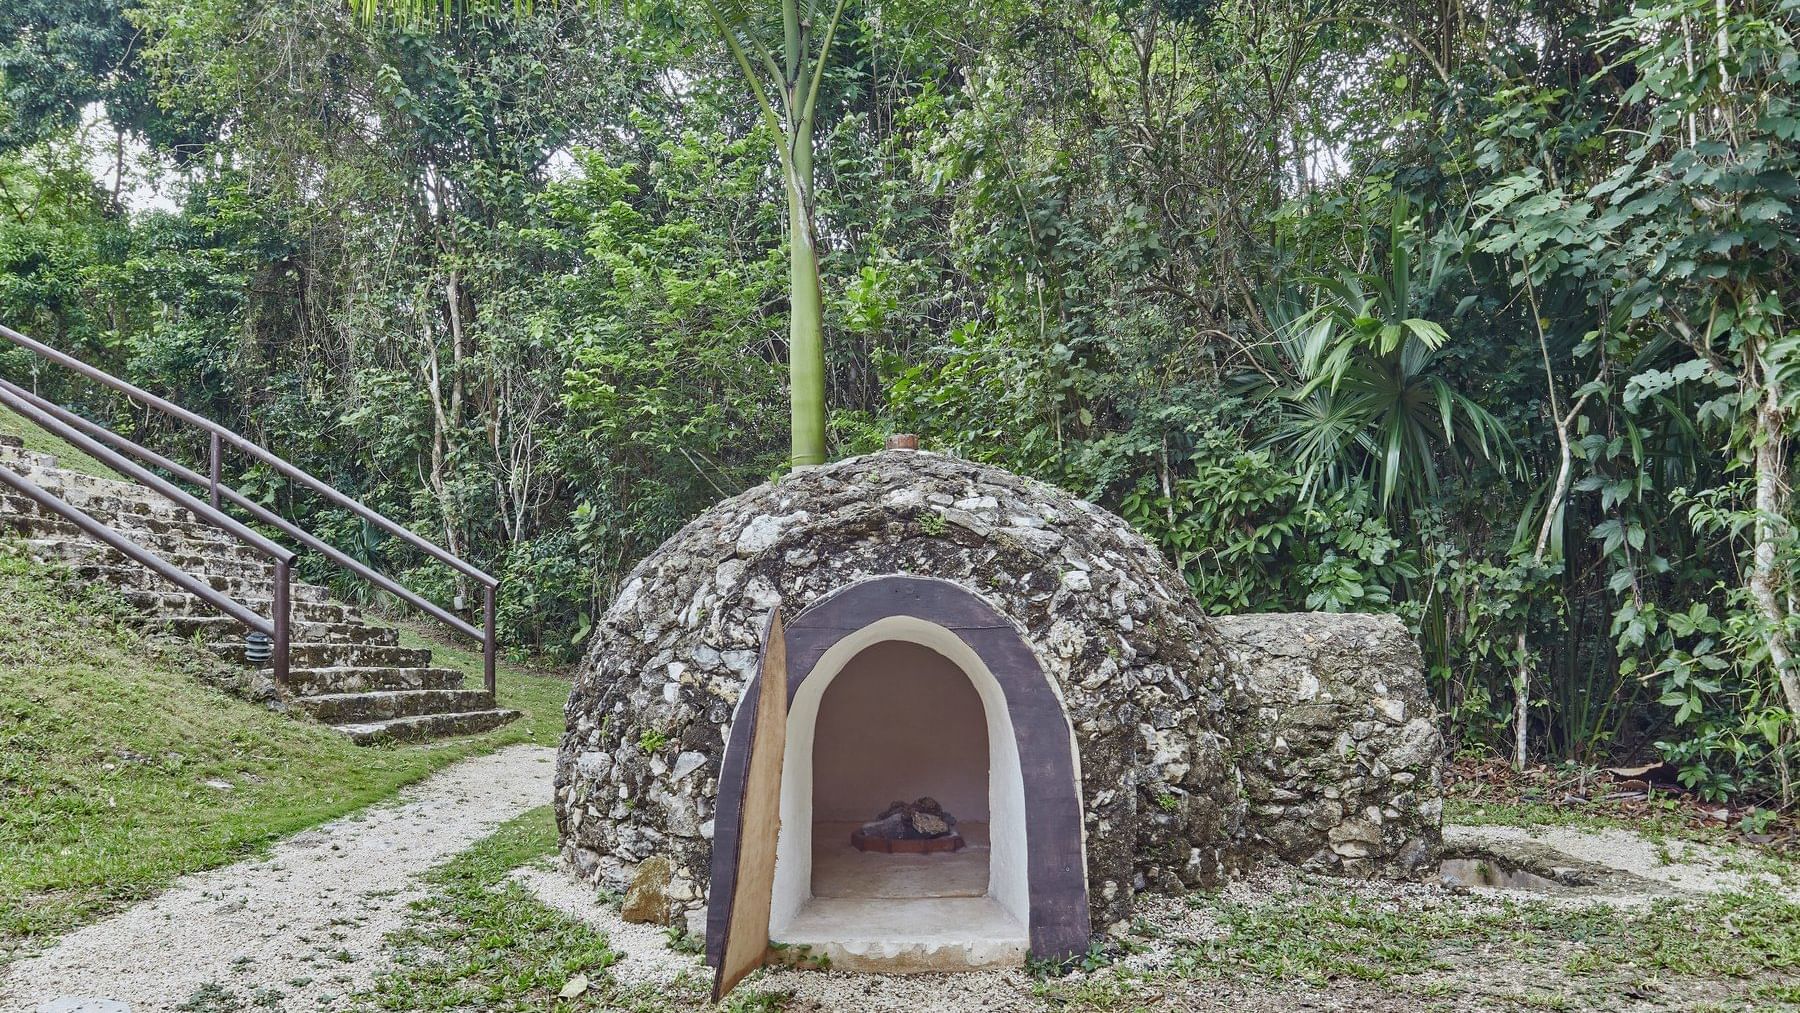 A Temazcal Tulum arranged by the forest at The Explorean Kohunlich